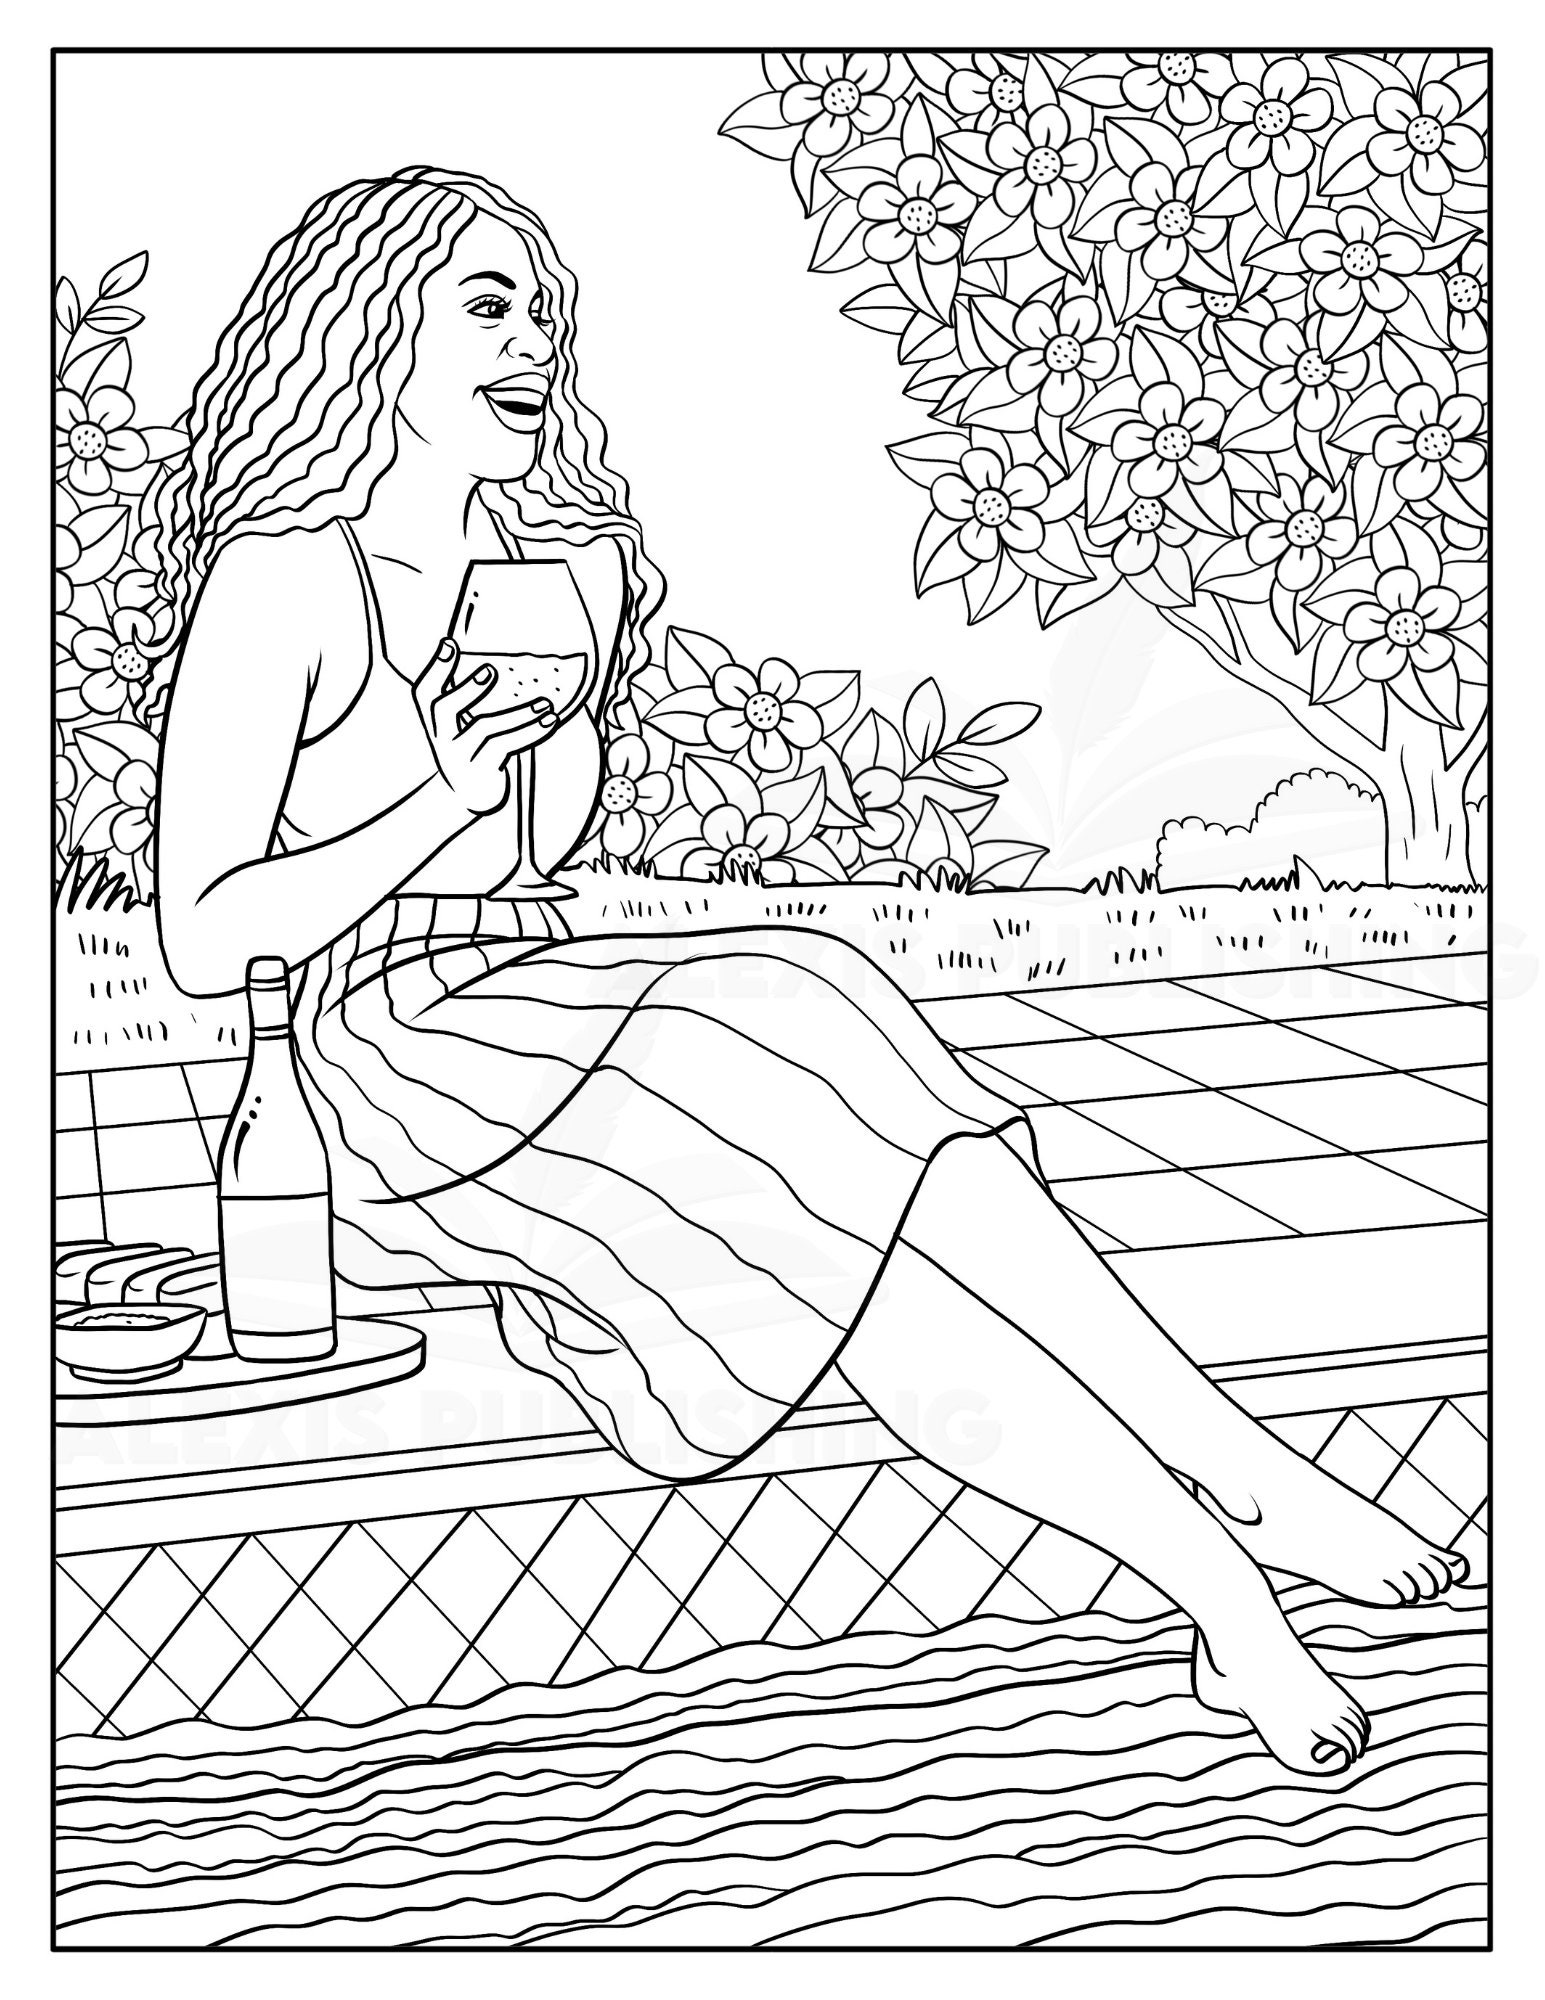 Black Women: Coloring Book 12 Brown Girls Illustrations Printable Pages for  Stress Relieving, for Relaxation Volume 3 